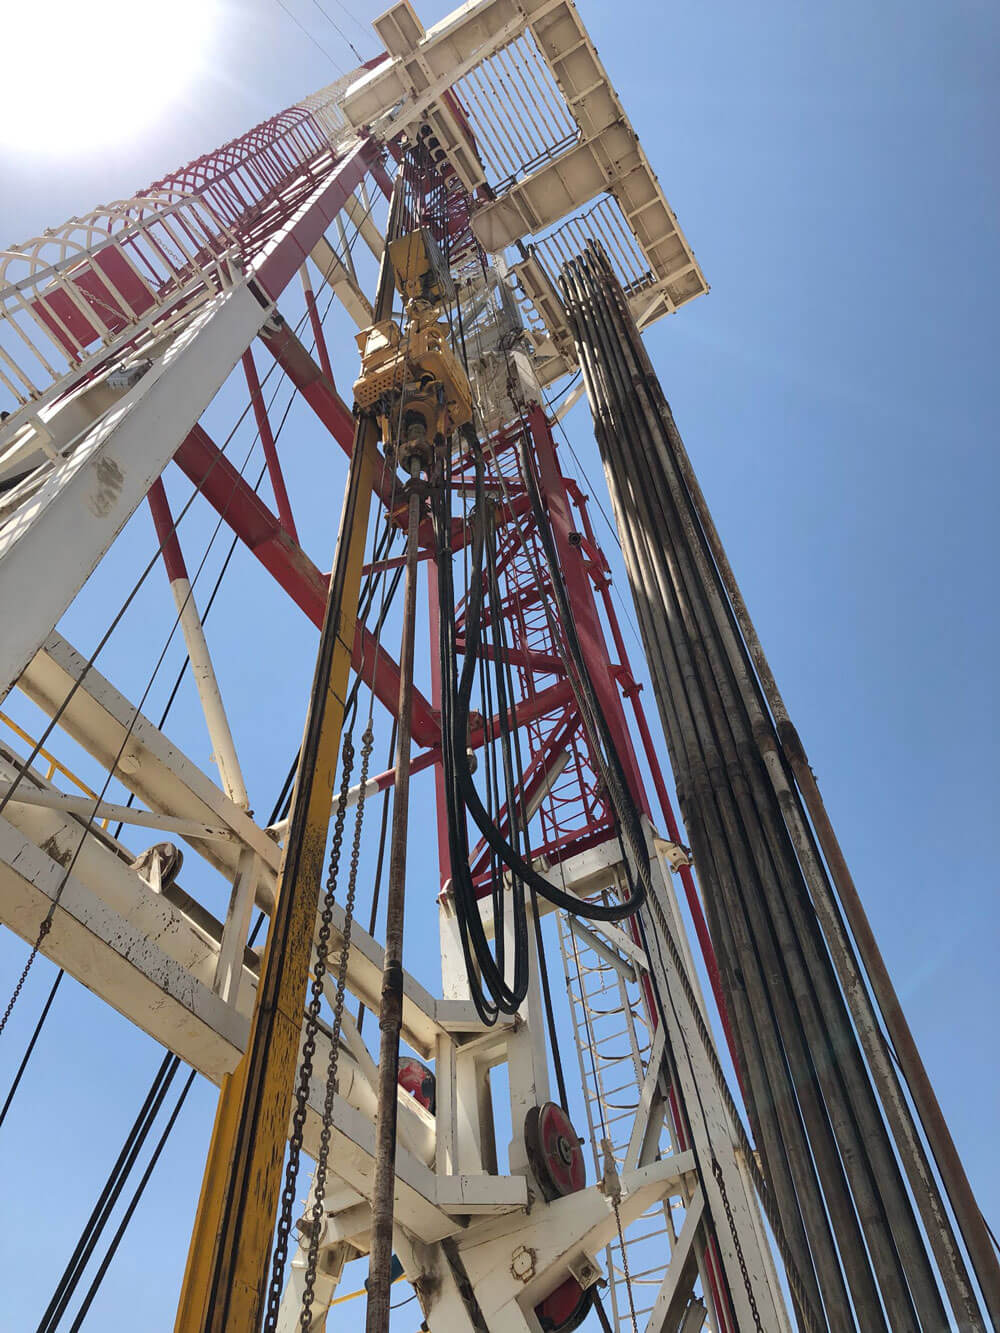 The first well drilling operations commenced (Turkmenistan)